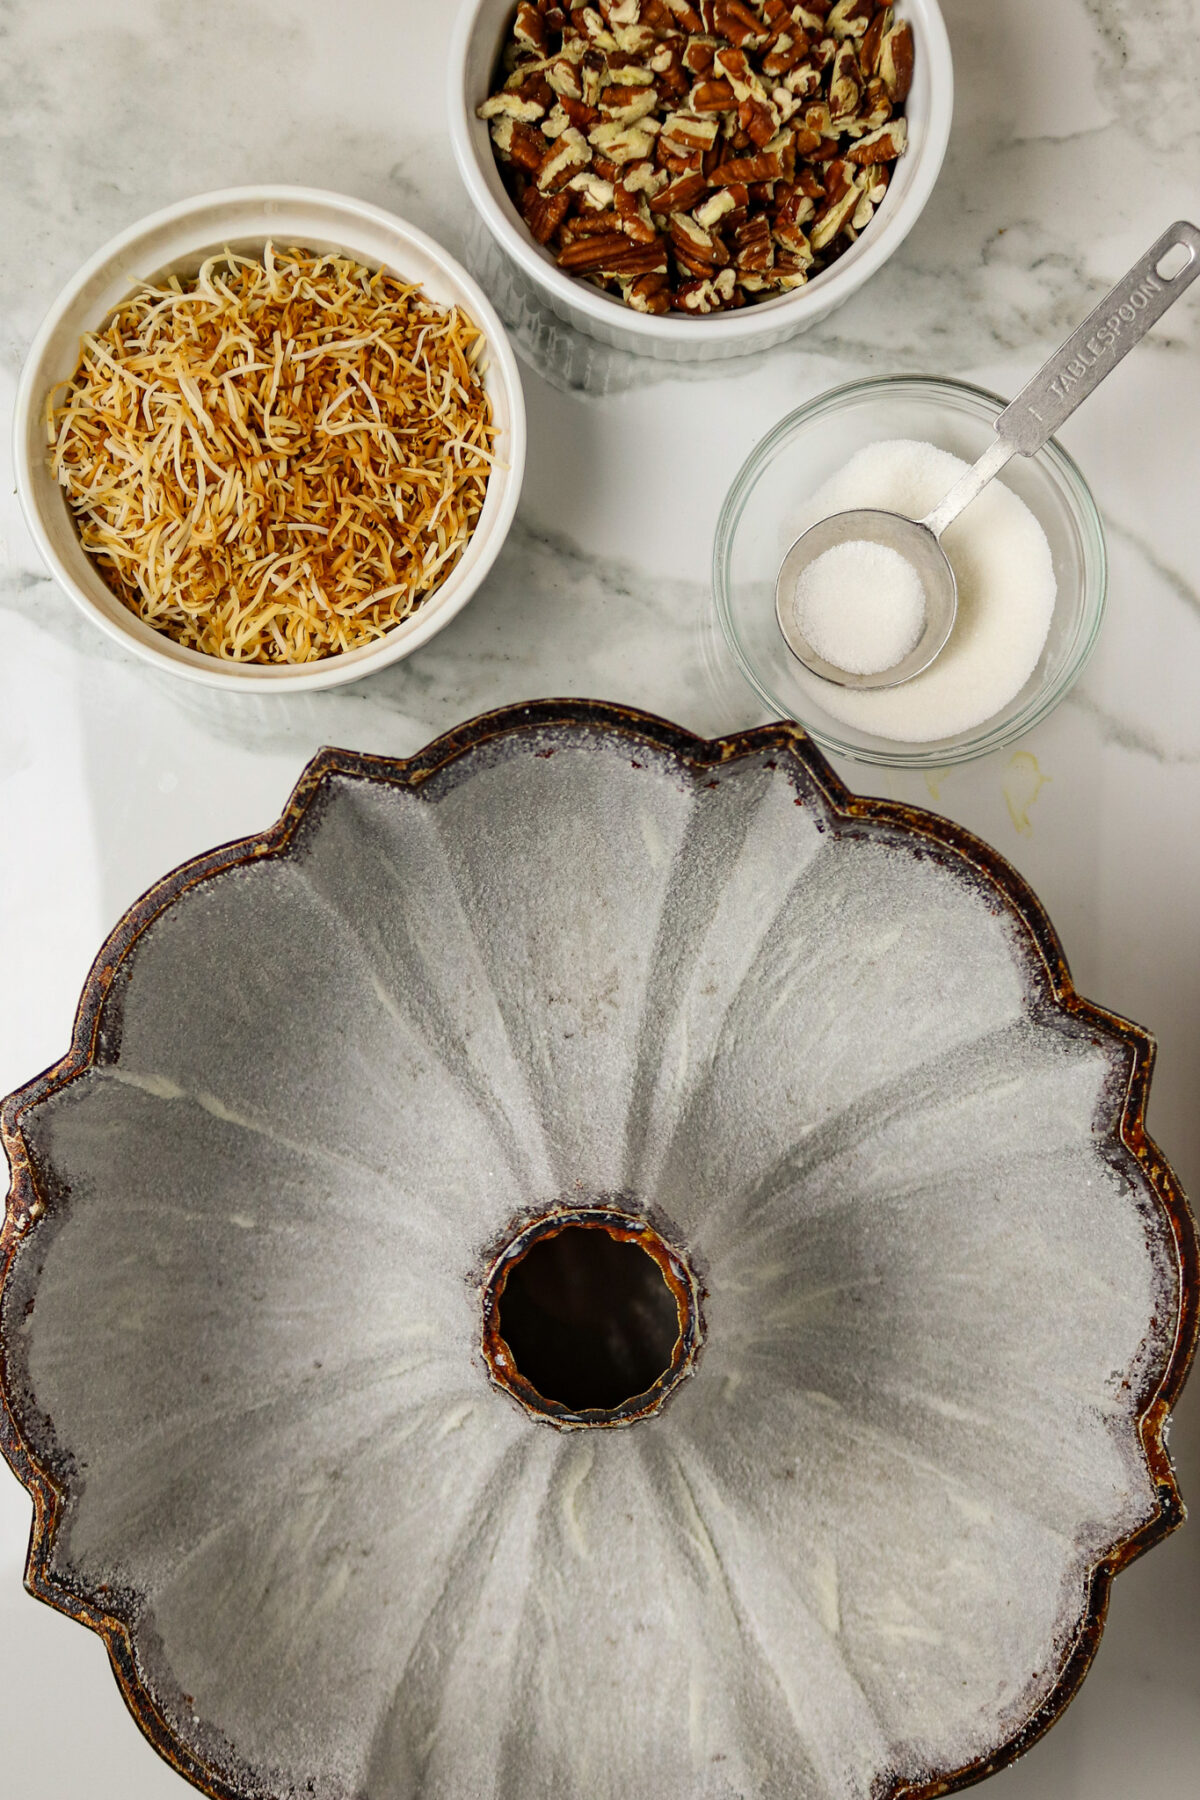 A prepared bundt cake pan coated with sugar and bowls of sugar, coconut, and pecans beside it.